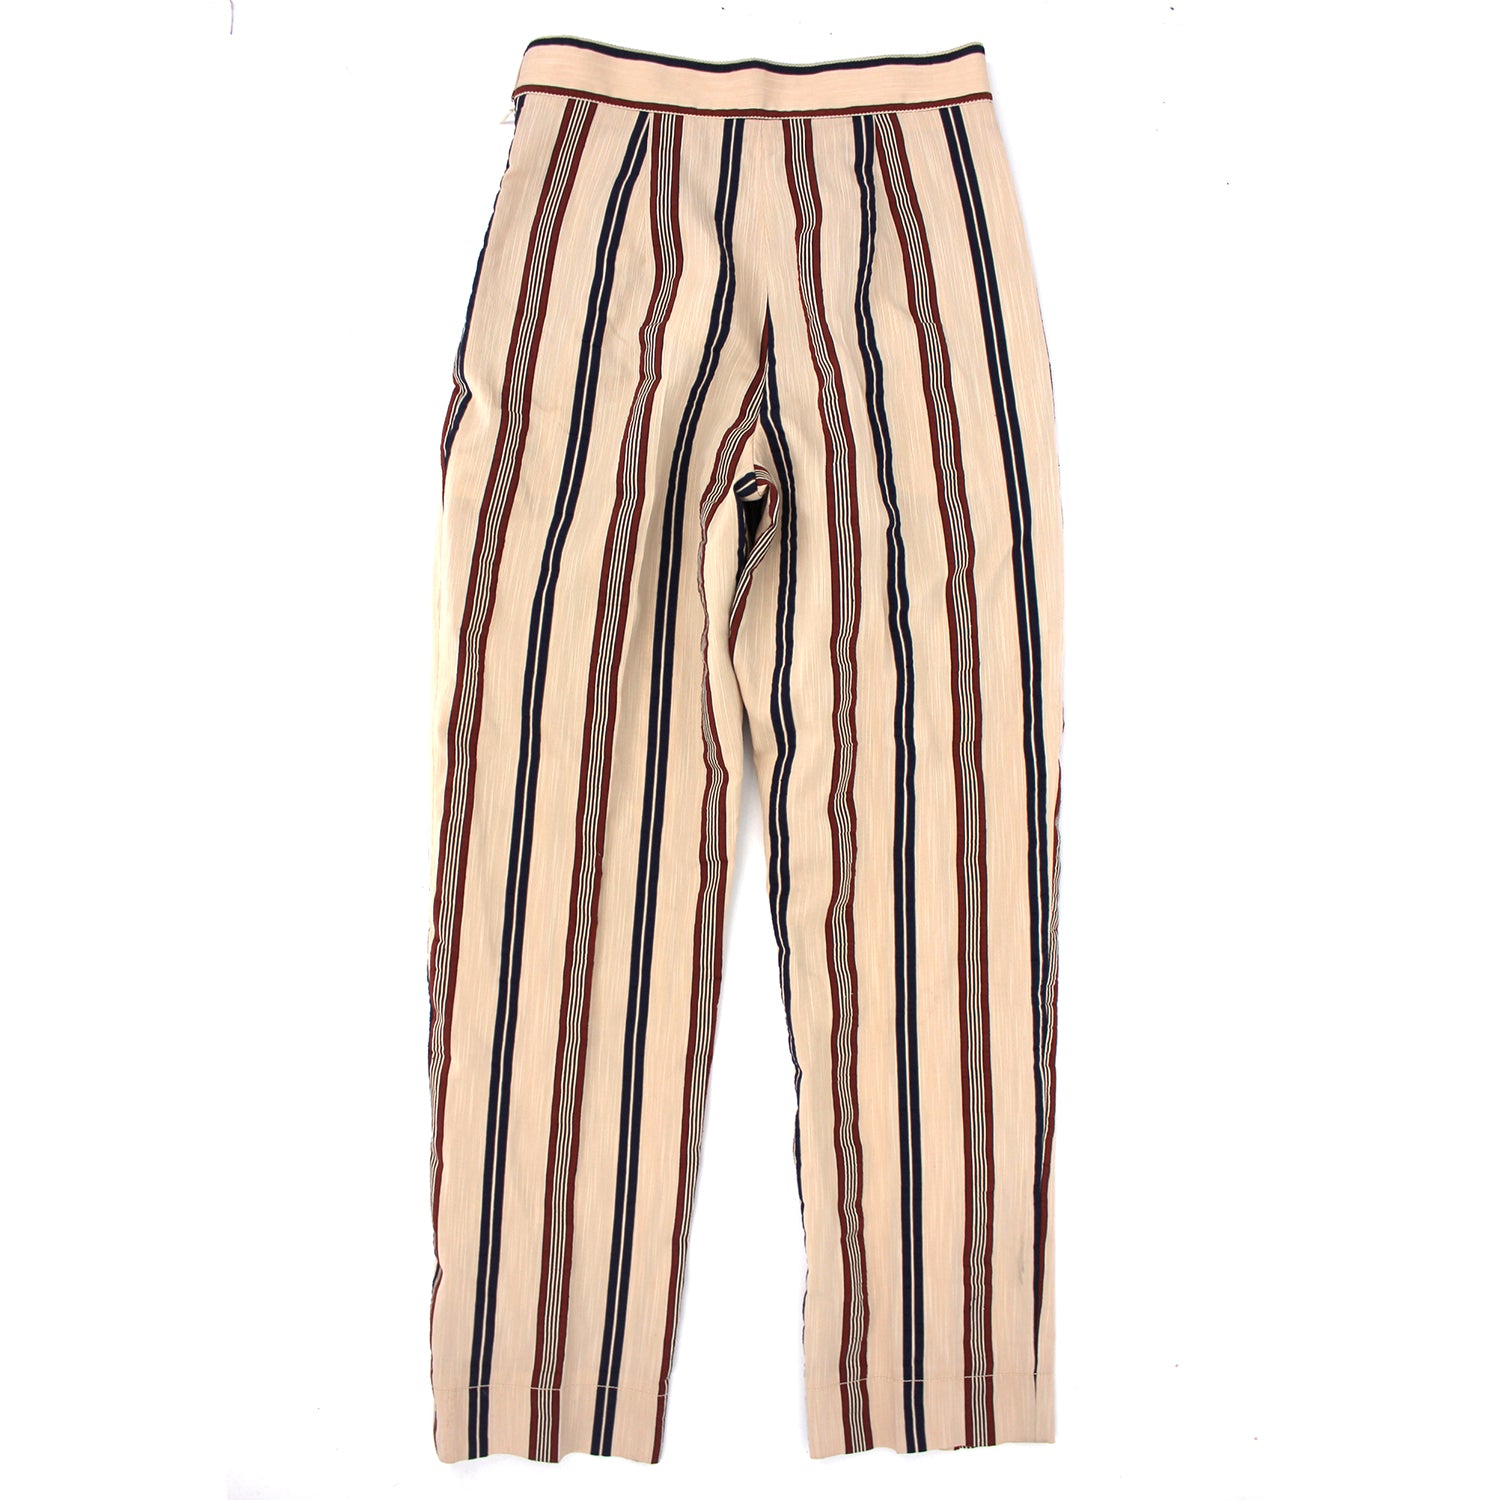 Tory Burch - The Slubbed Striped Blazer, Striped Pant and